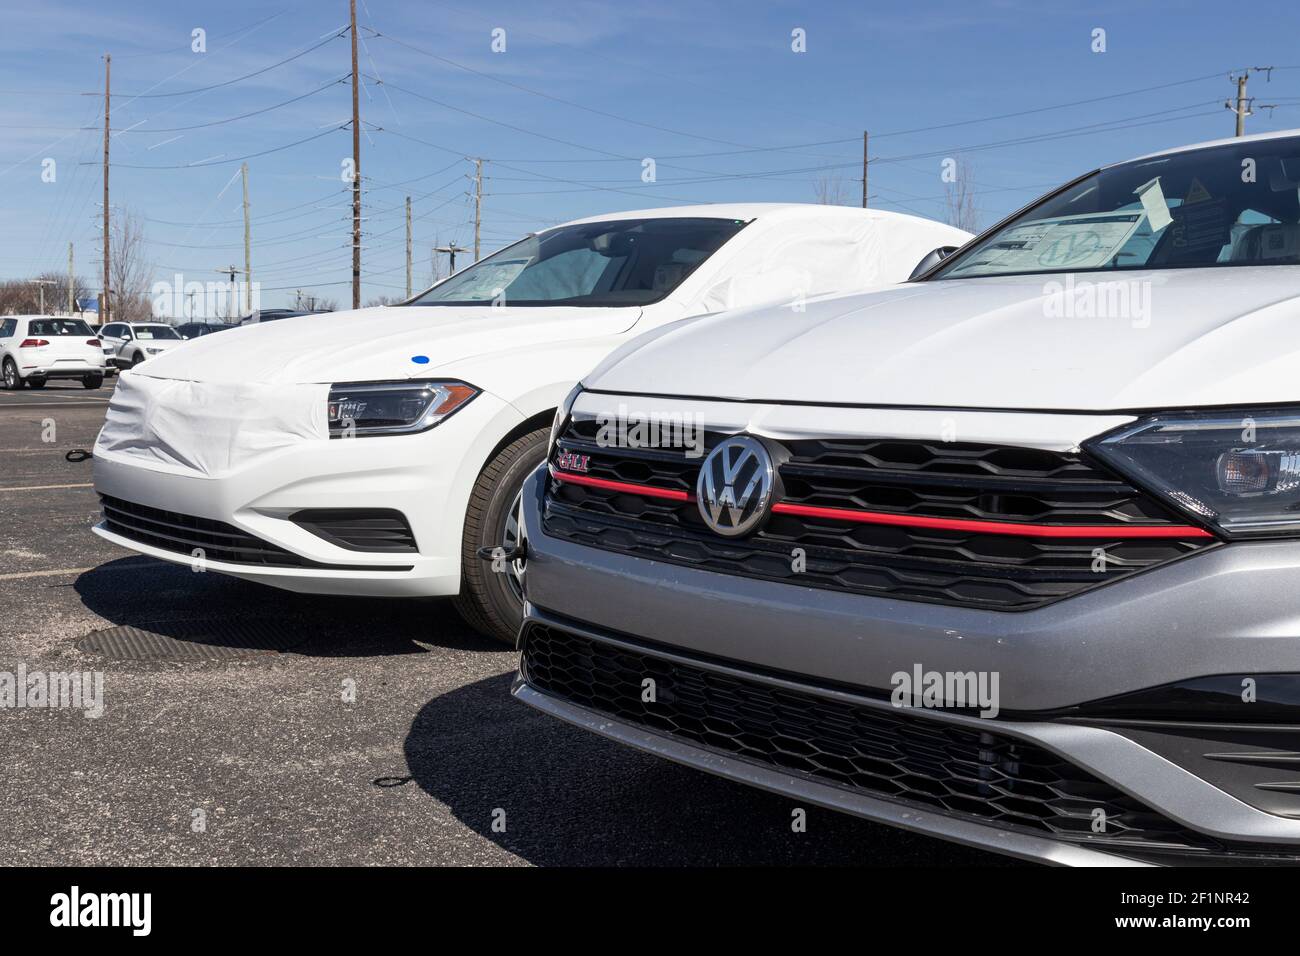 Indianapolis - Circa March 2021: Volkswagen Cars and SUV Dealership. VW is among the world's largest car manufacturers. Stock Photo